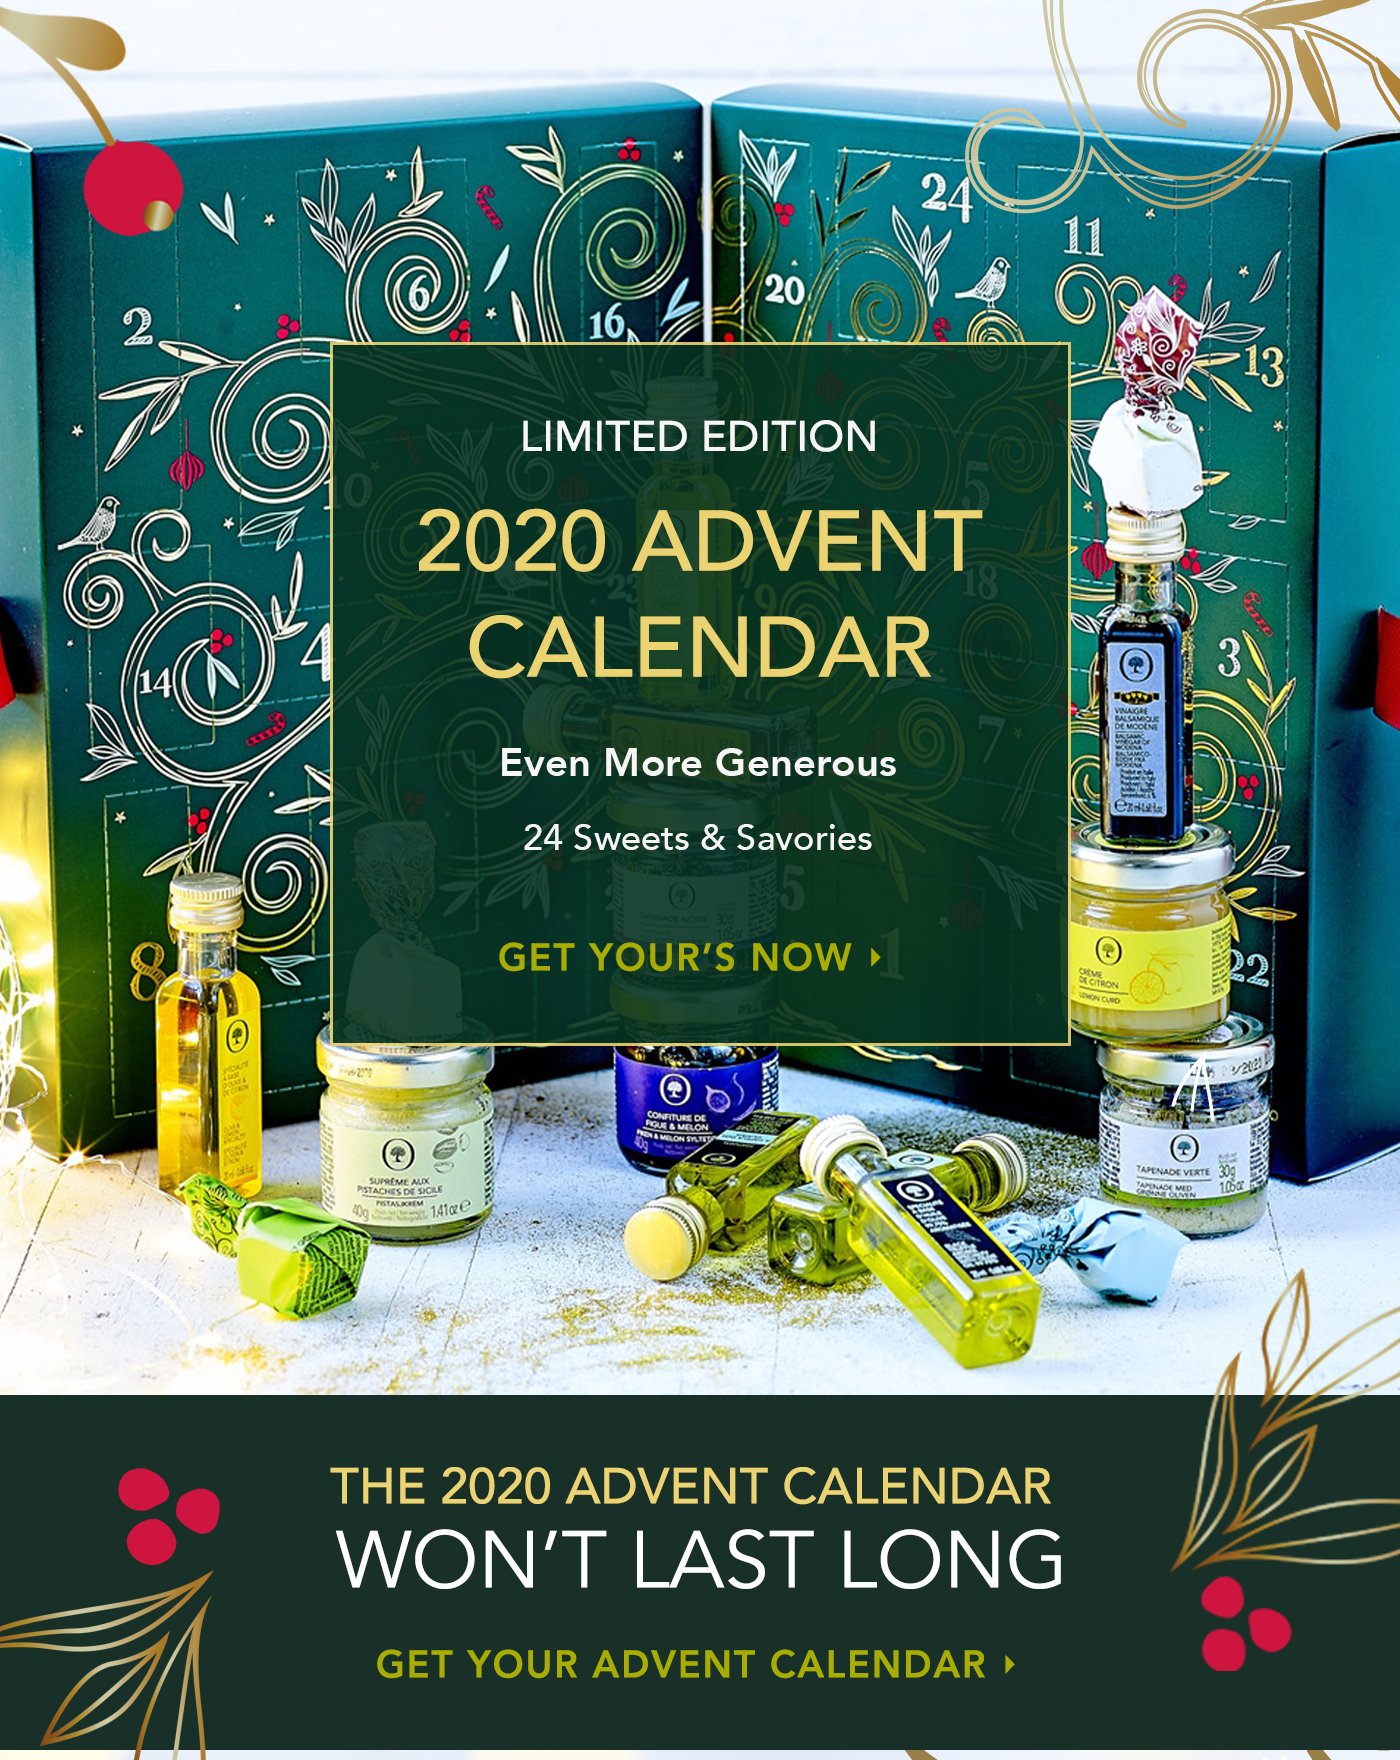 Oliviers & Co Limited Edition 2020 Advent Calendar ⭐️ Get Yours Today